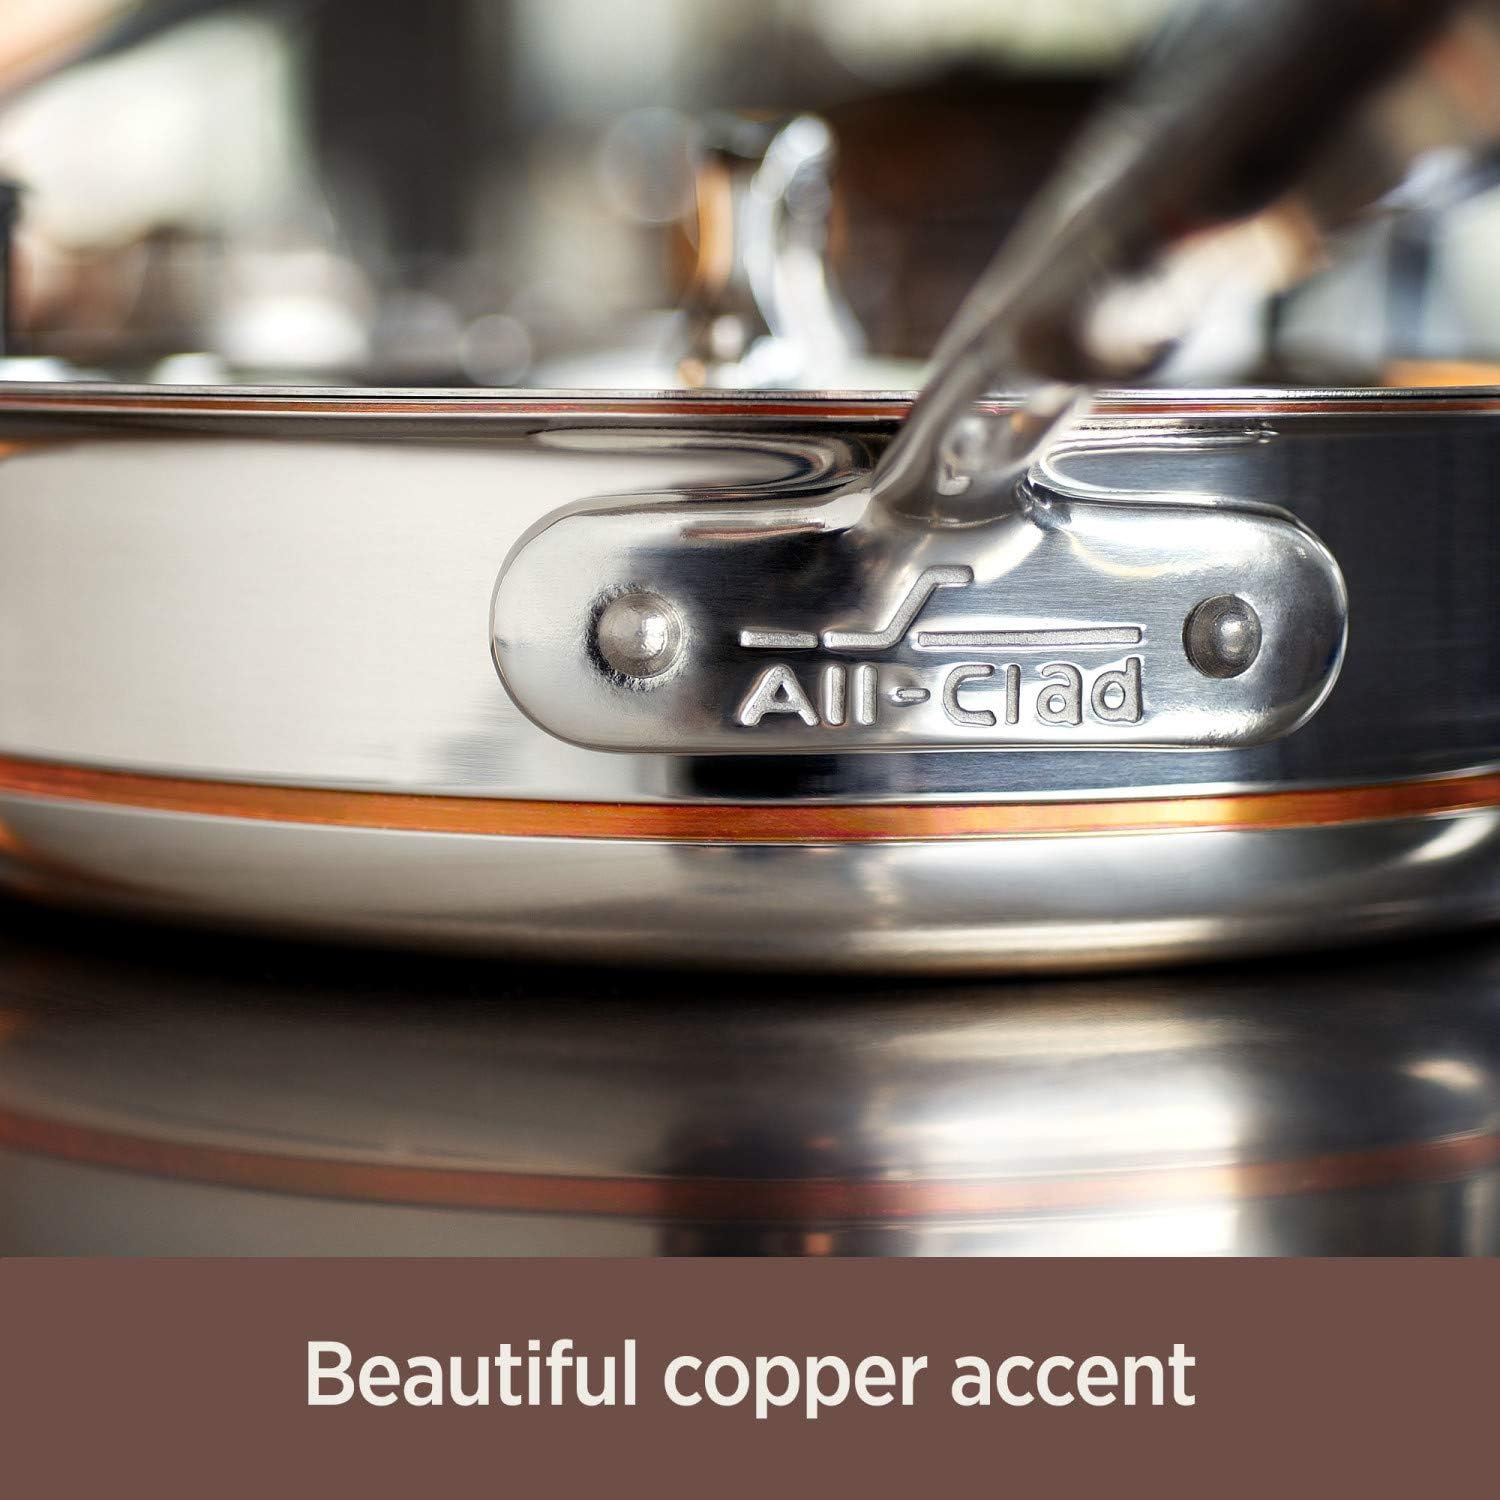 All-Clad Copper Core 5-Ply Stainless Steel Saucepan with Lid 3 Quart  Induction Oven Broil Safe 600F Pots and Pans, Cookware